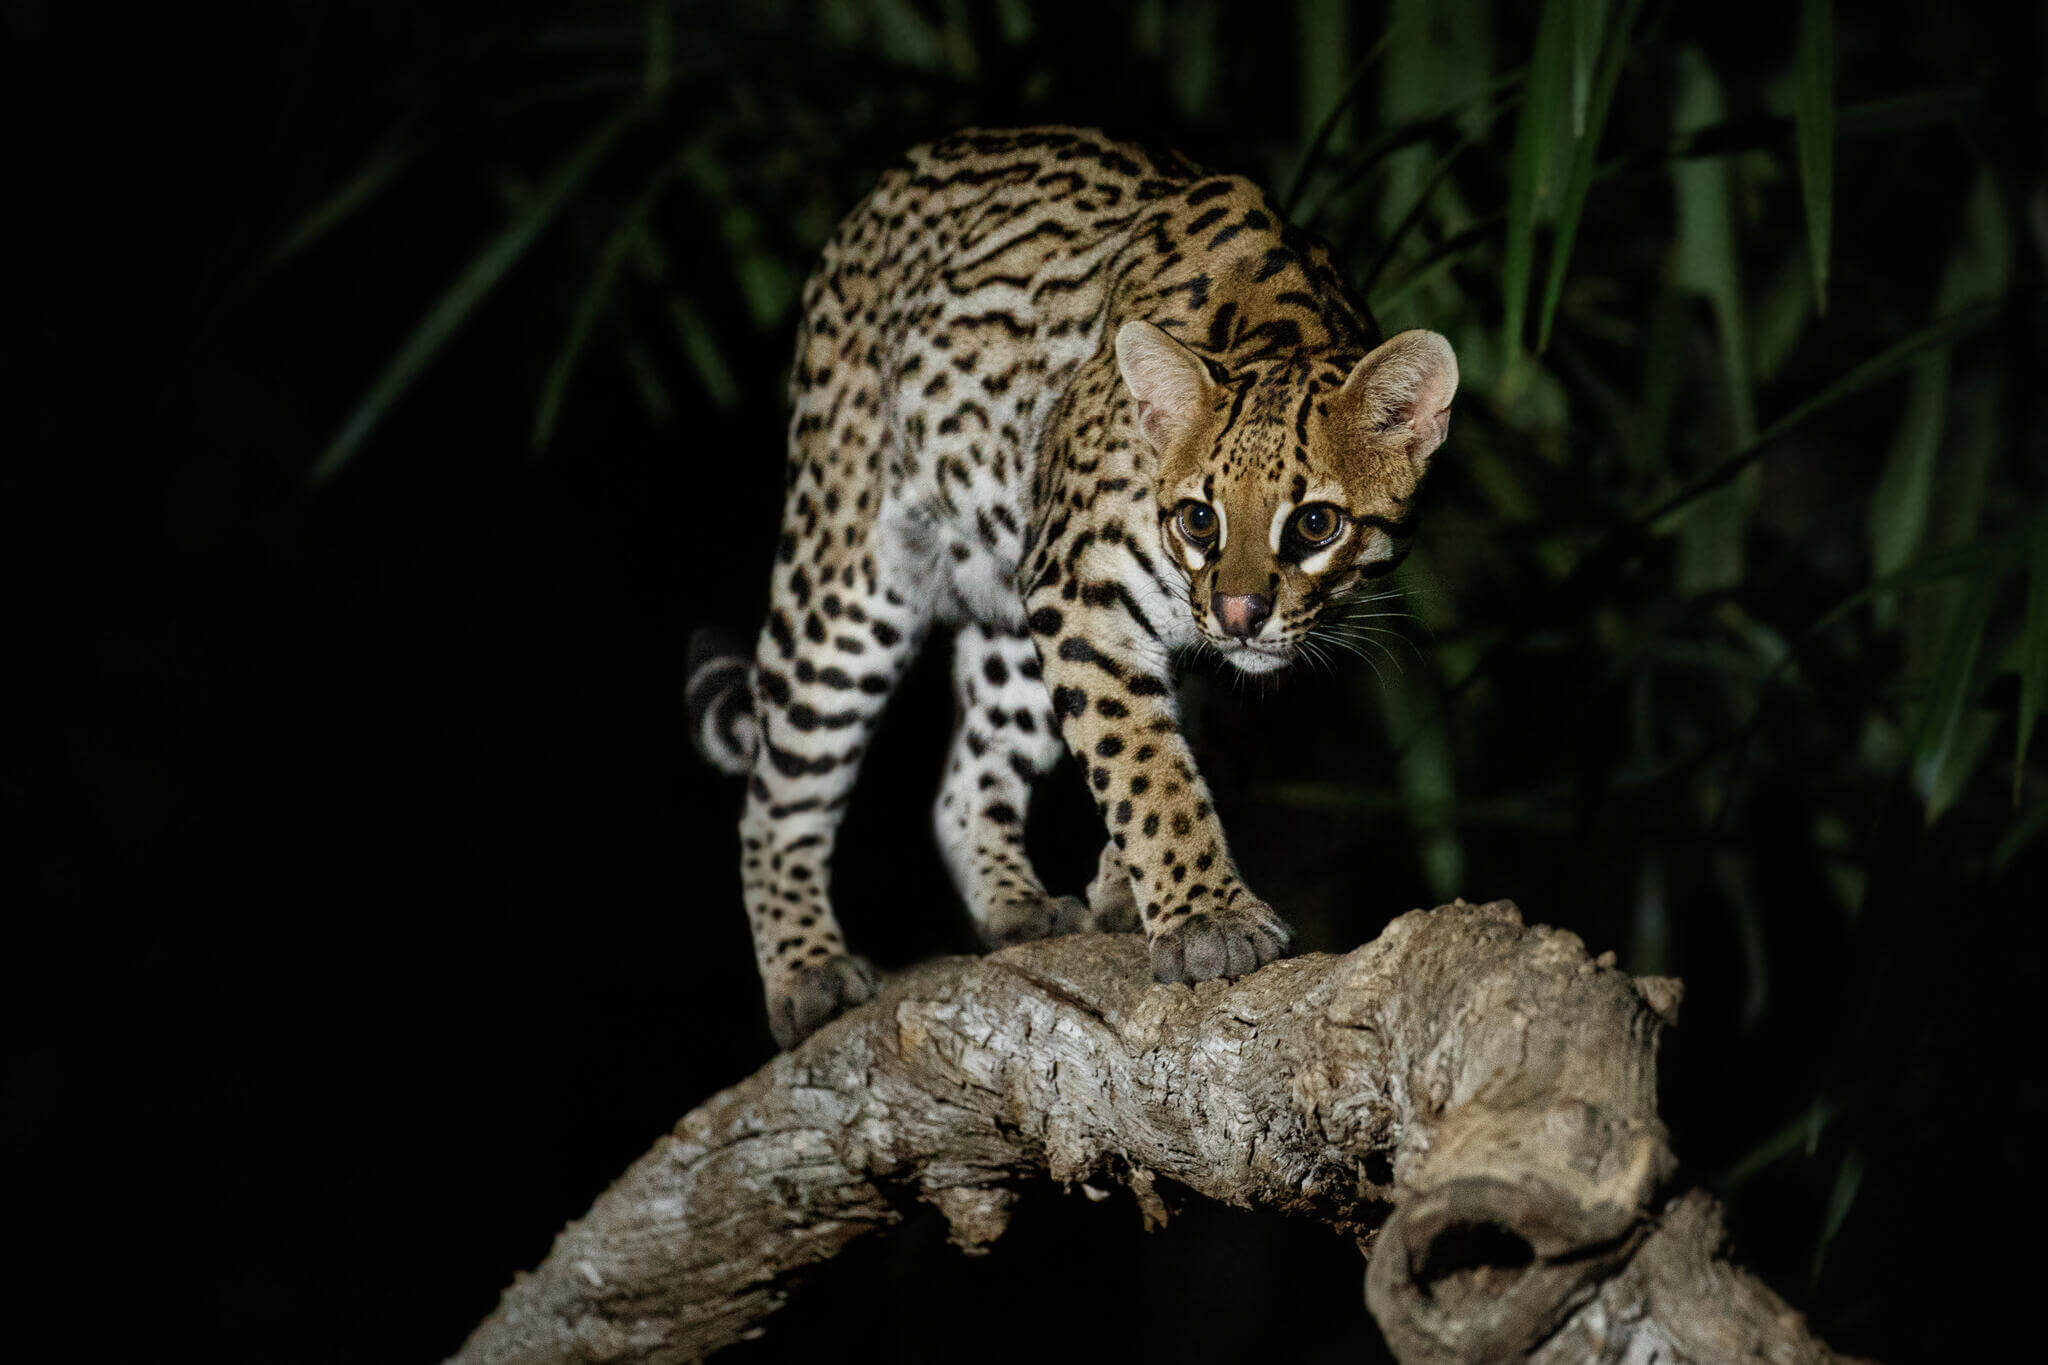 An ocelot walking along a large tree branch at night.